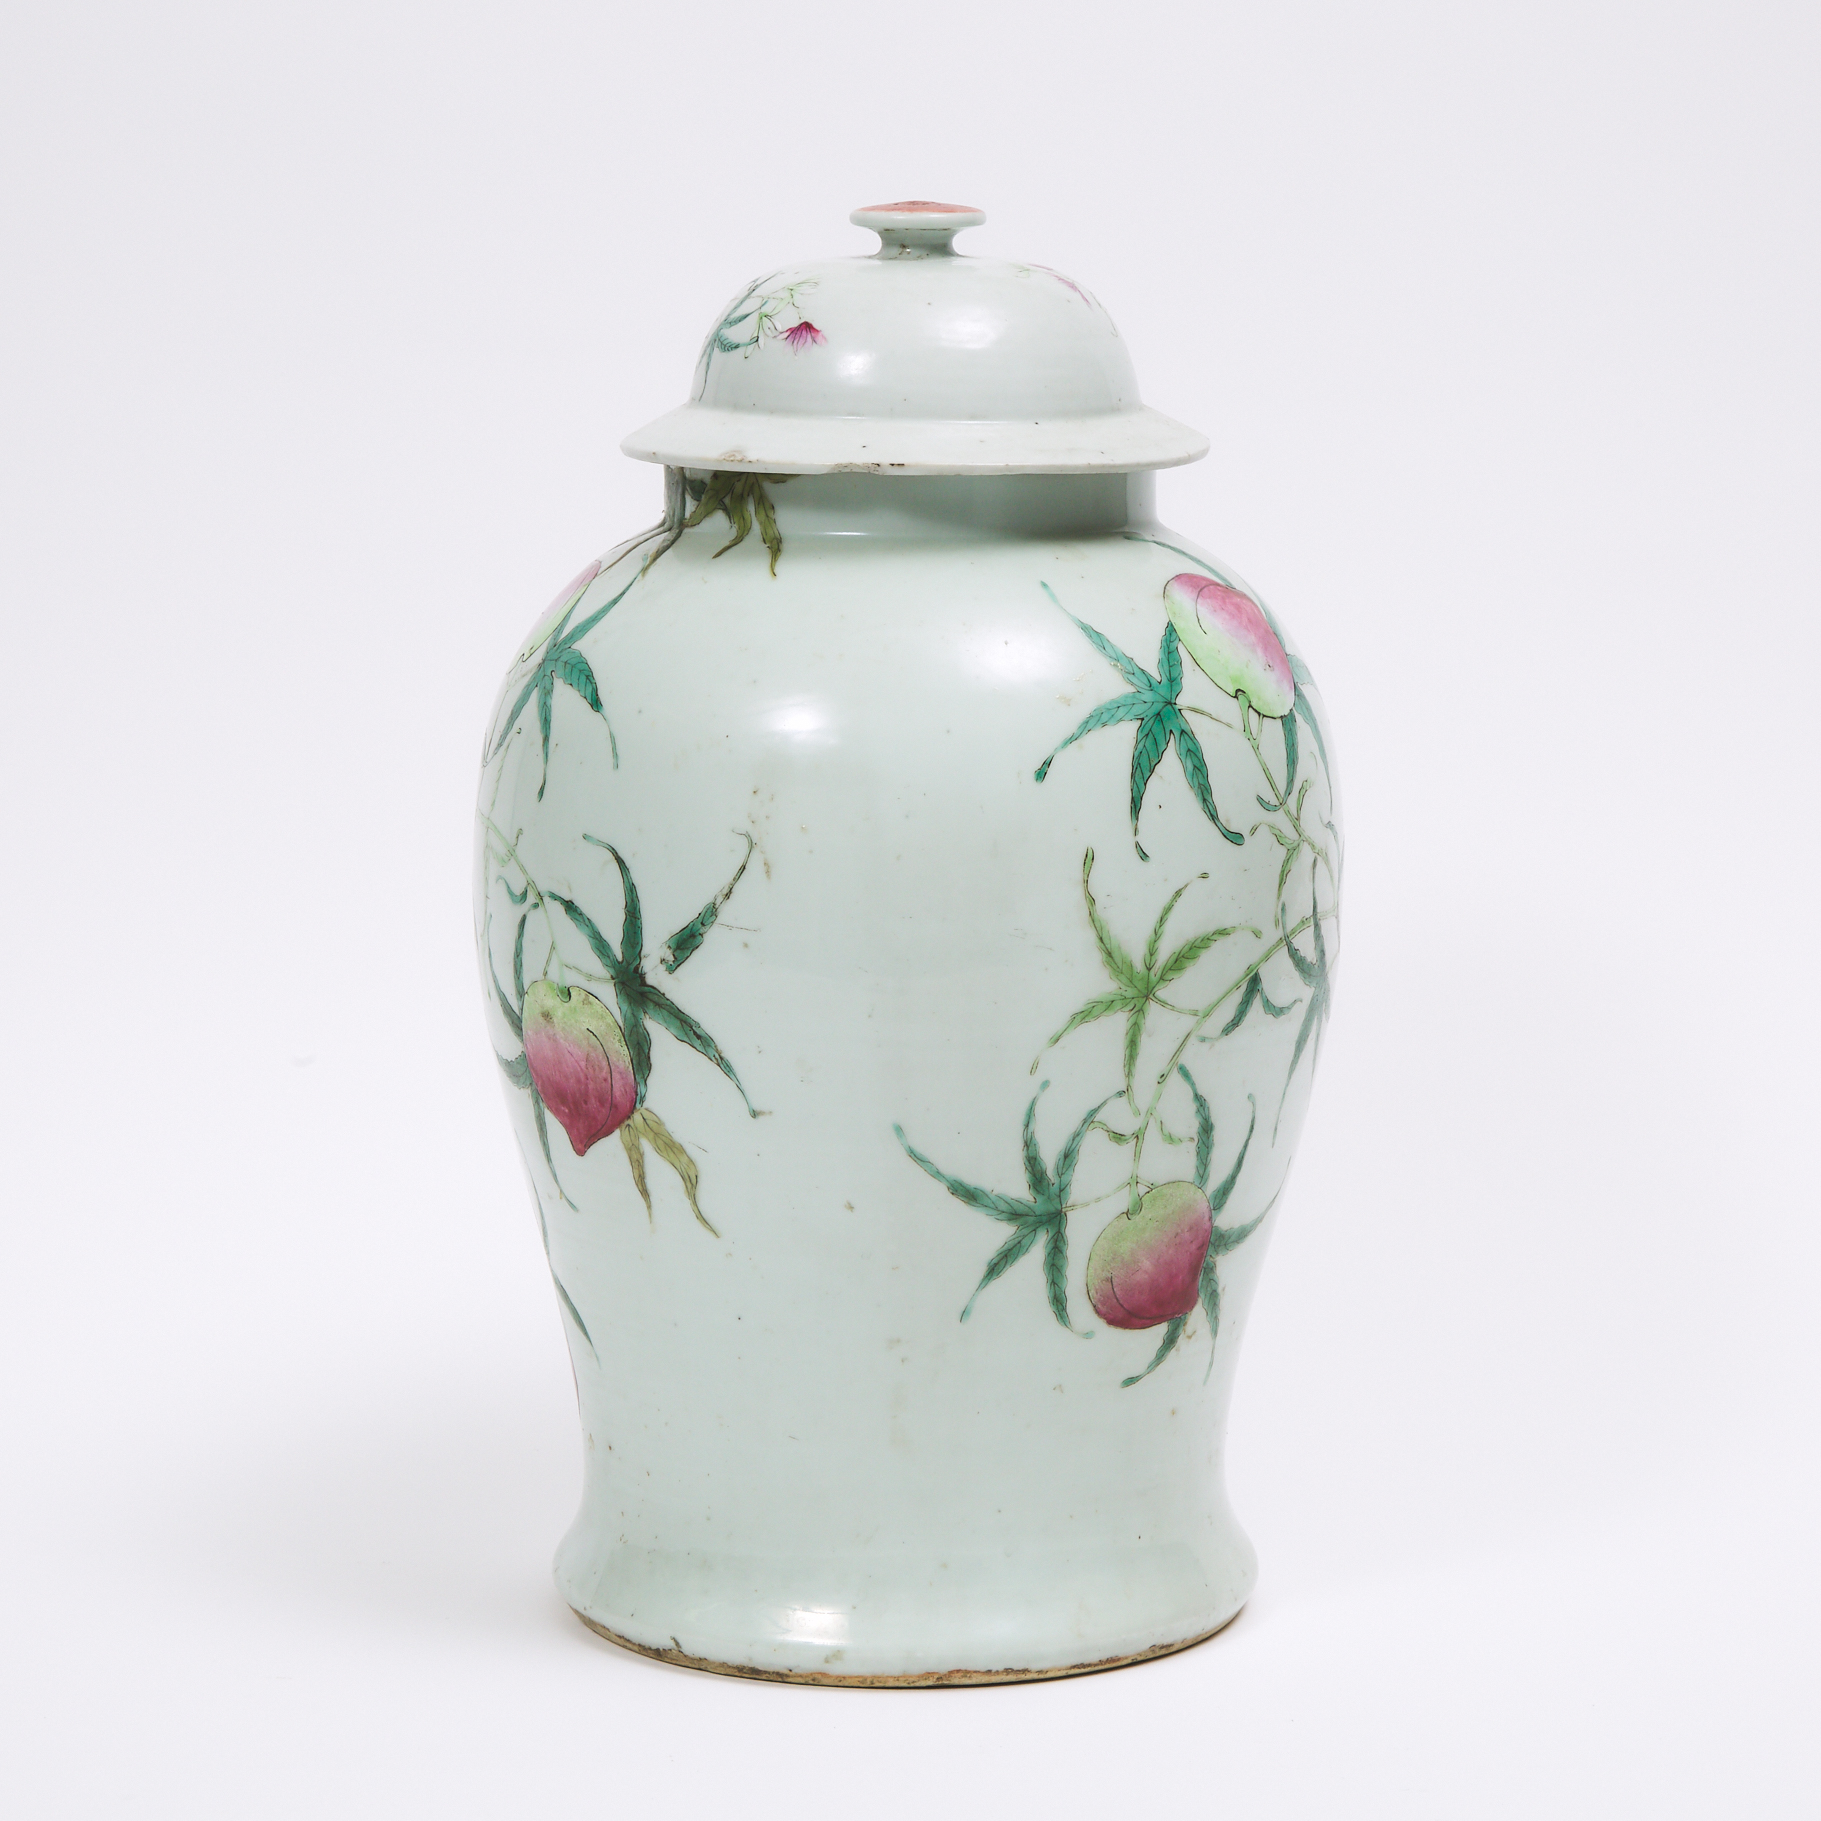 A Large Famille Rose 'Nine Peaches' Jar and Cover, Daoguang Mark and Possibly of the Period, 19th Century